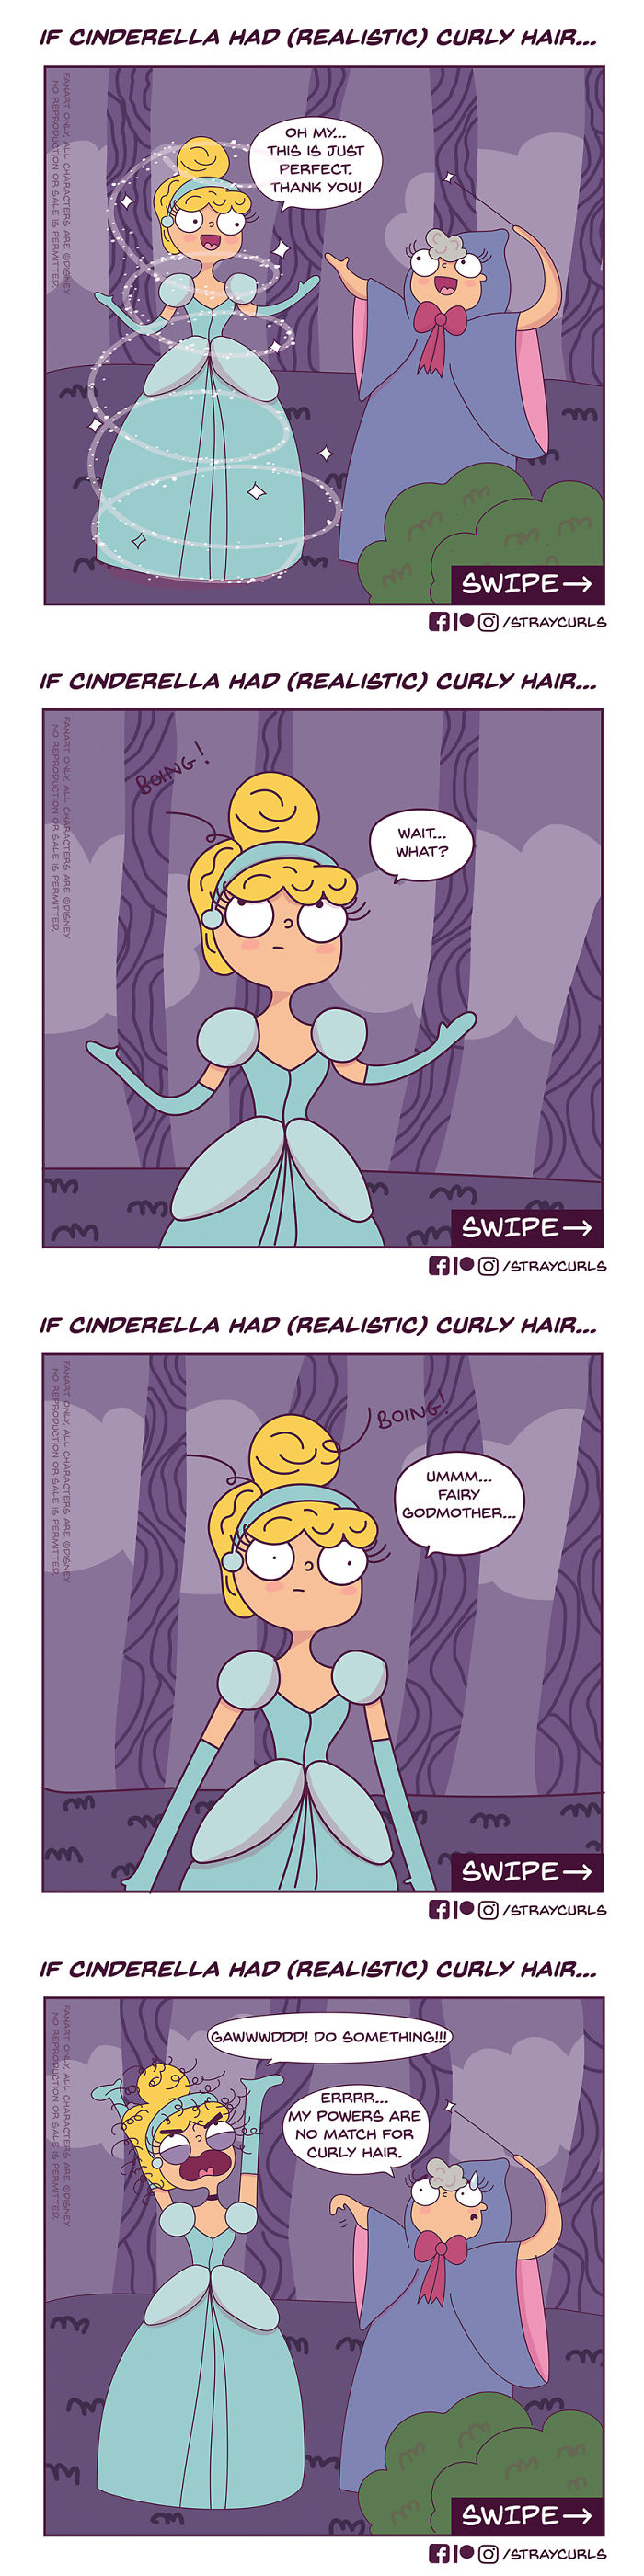 Illustrator Shows What Would Happen If Disney Princesses Had Curly Hair,  And The Consequences Are Hilarious